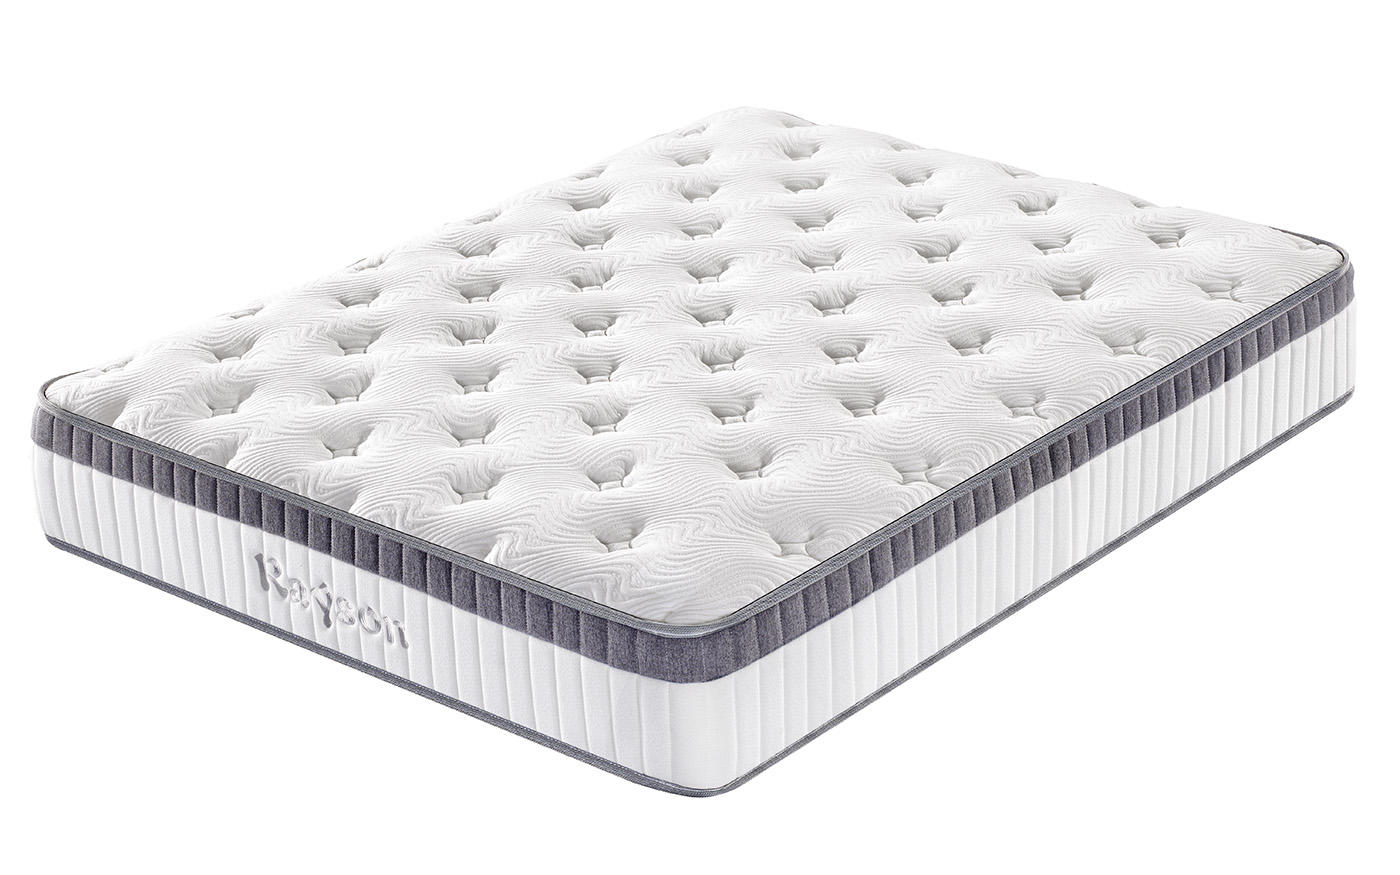 Synwin high-quality best pocket spring mattress wholesale high density-1